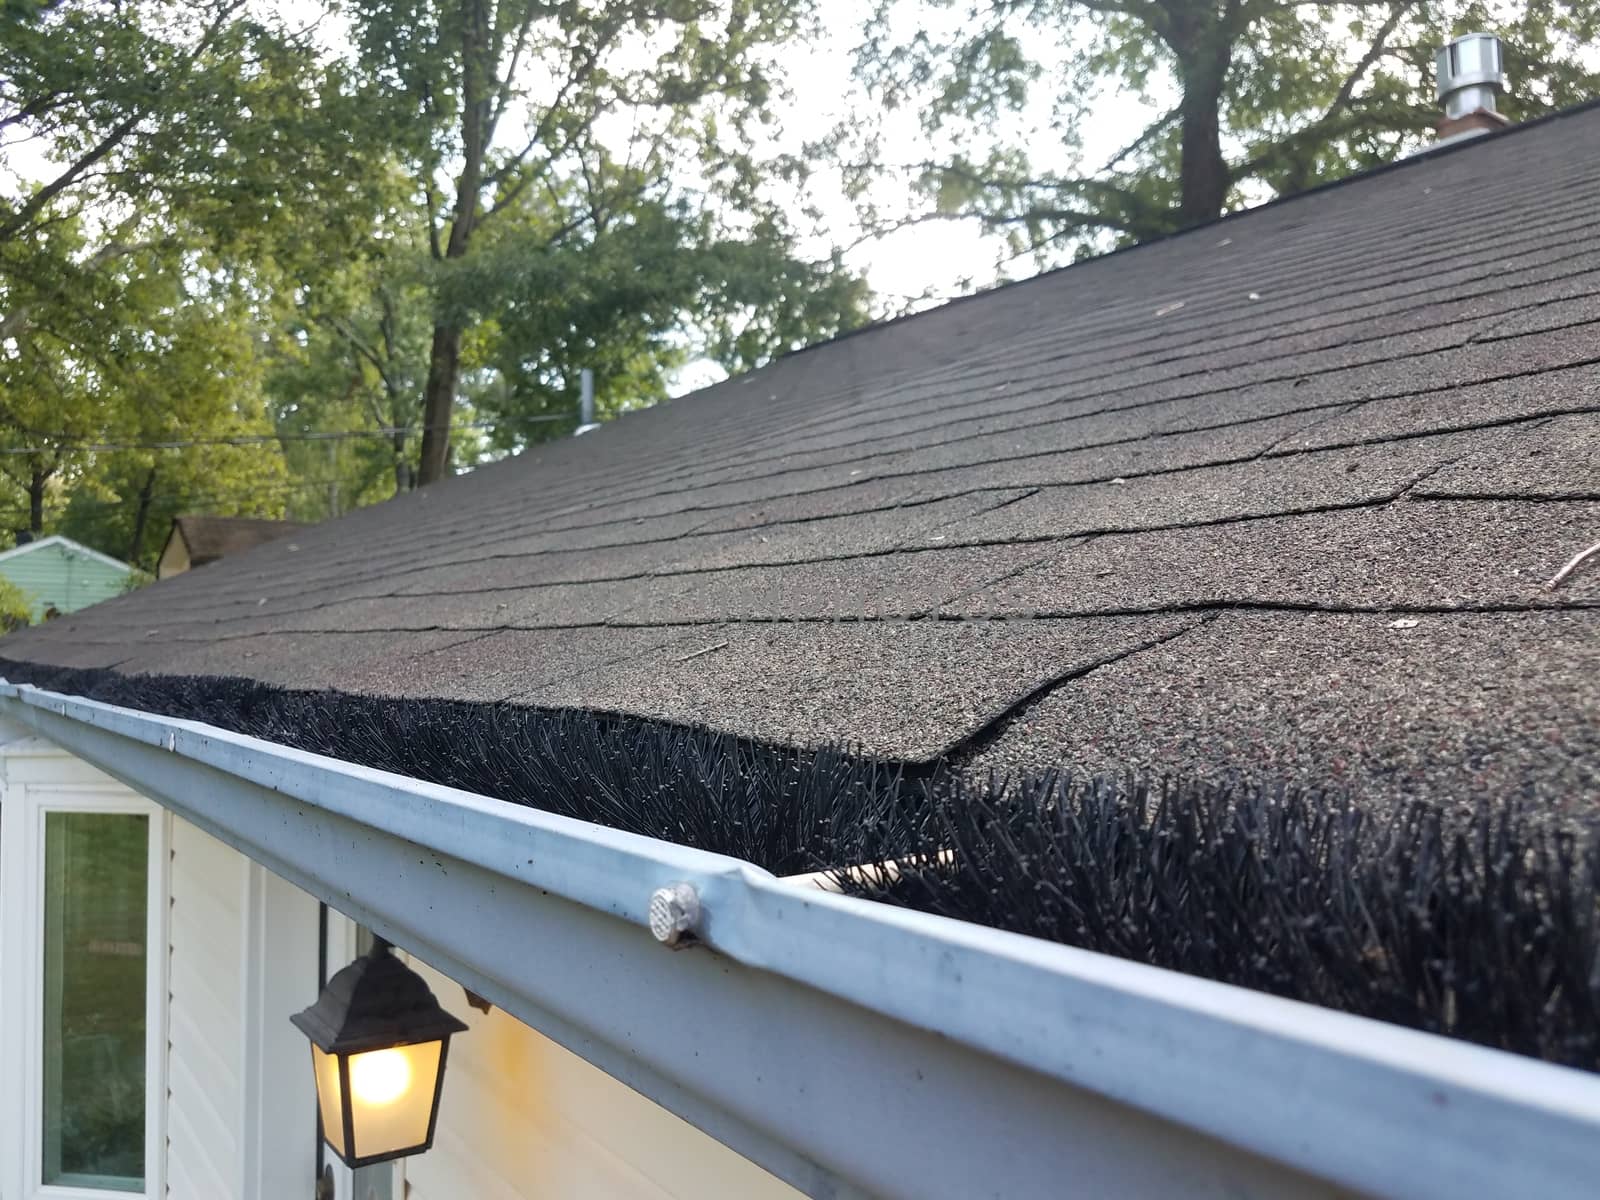 black pipe cleaner in cleaned gutter with roof of house by stockphotofan1